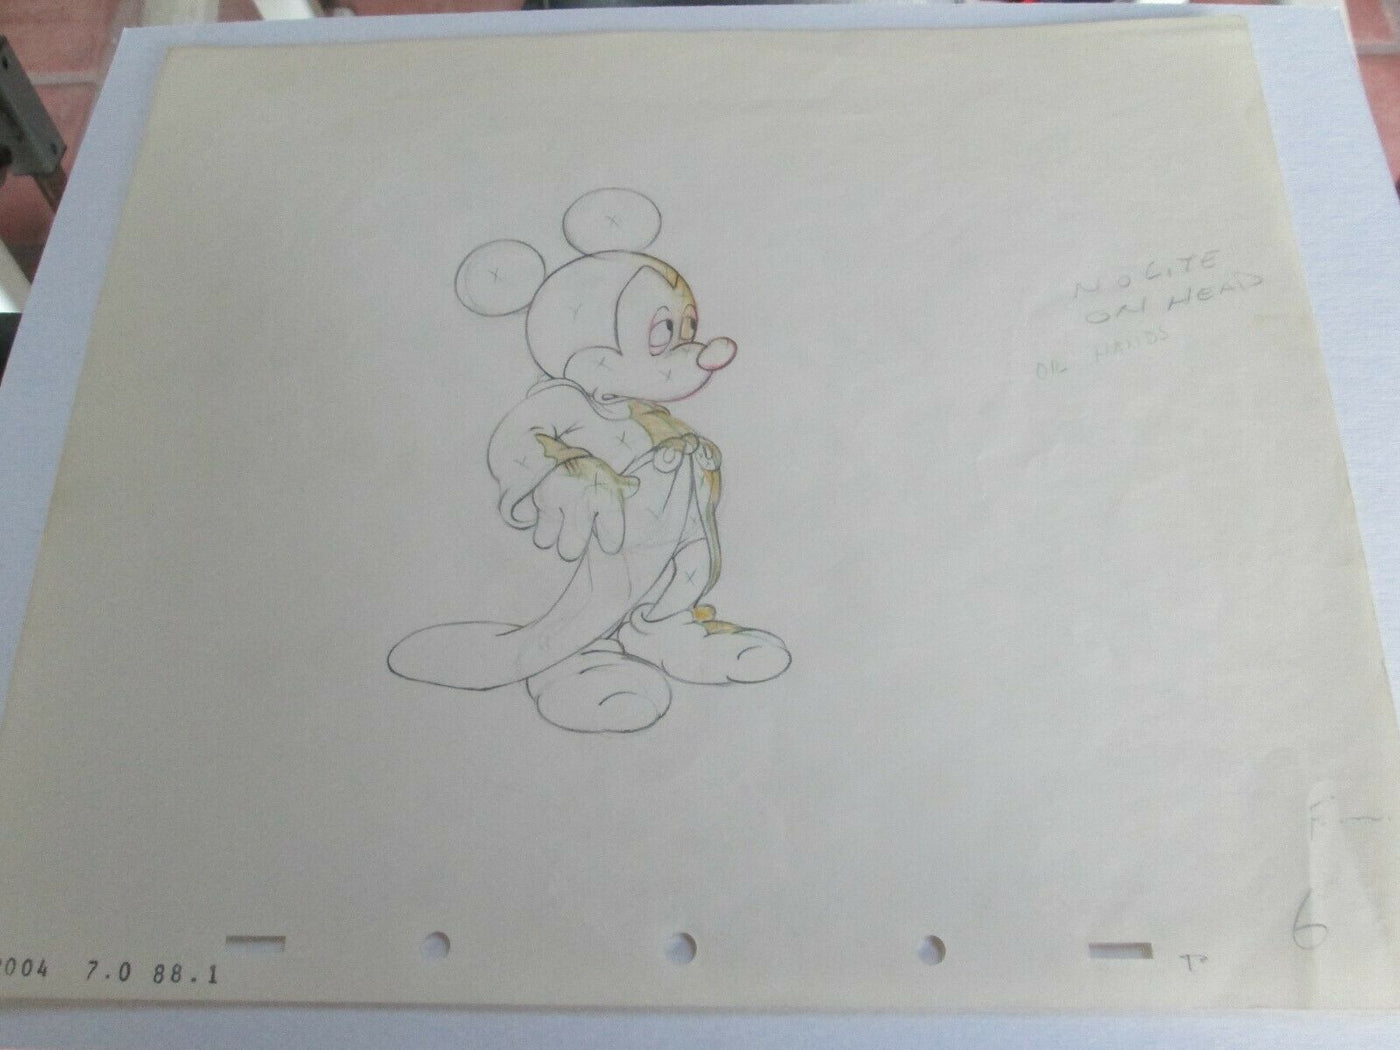 Original Disney Production Drawing Featuring Mickey Mouse from Fantasia